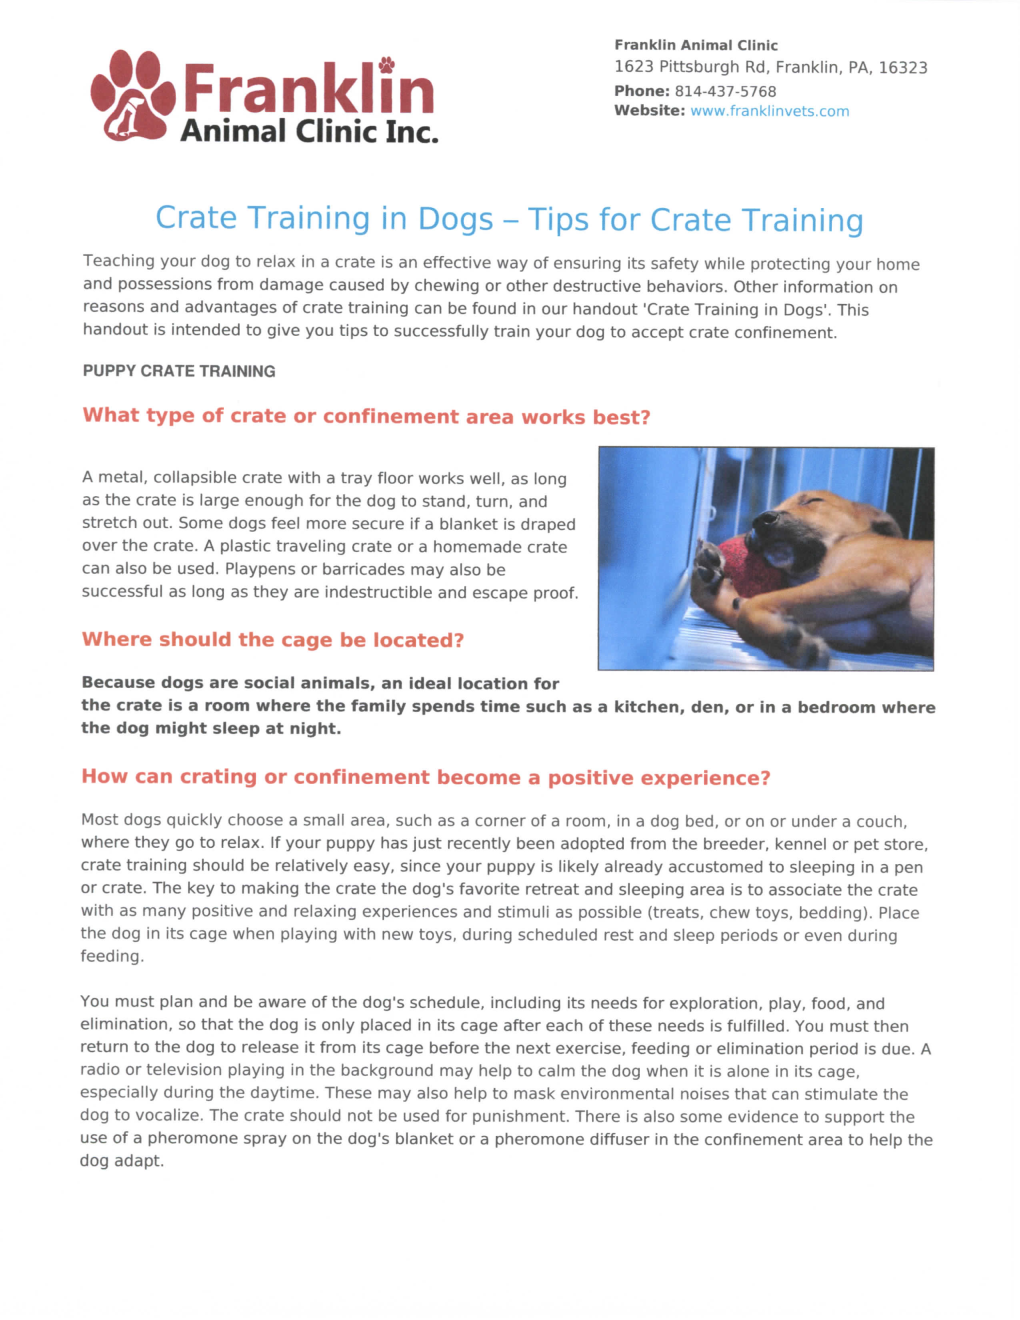 Tips on Crate Training